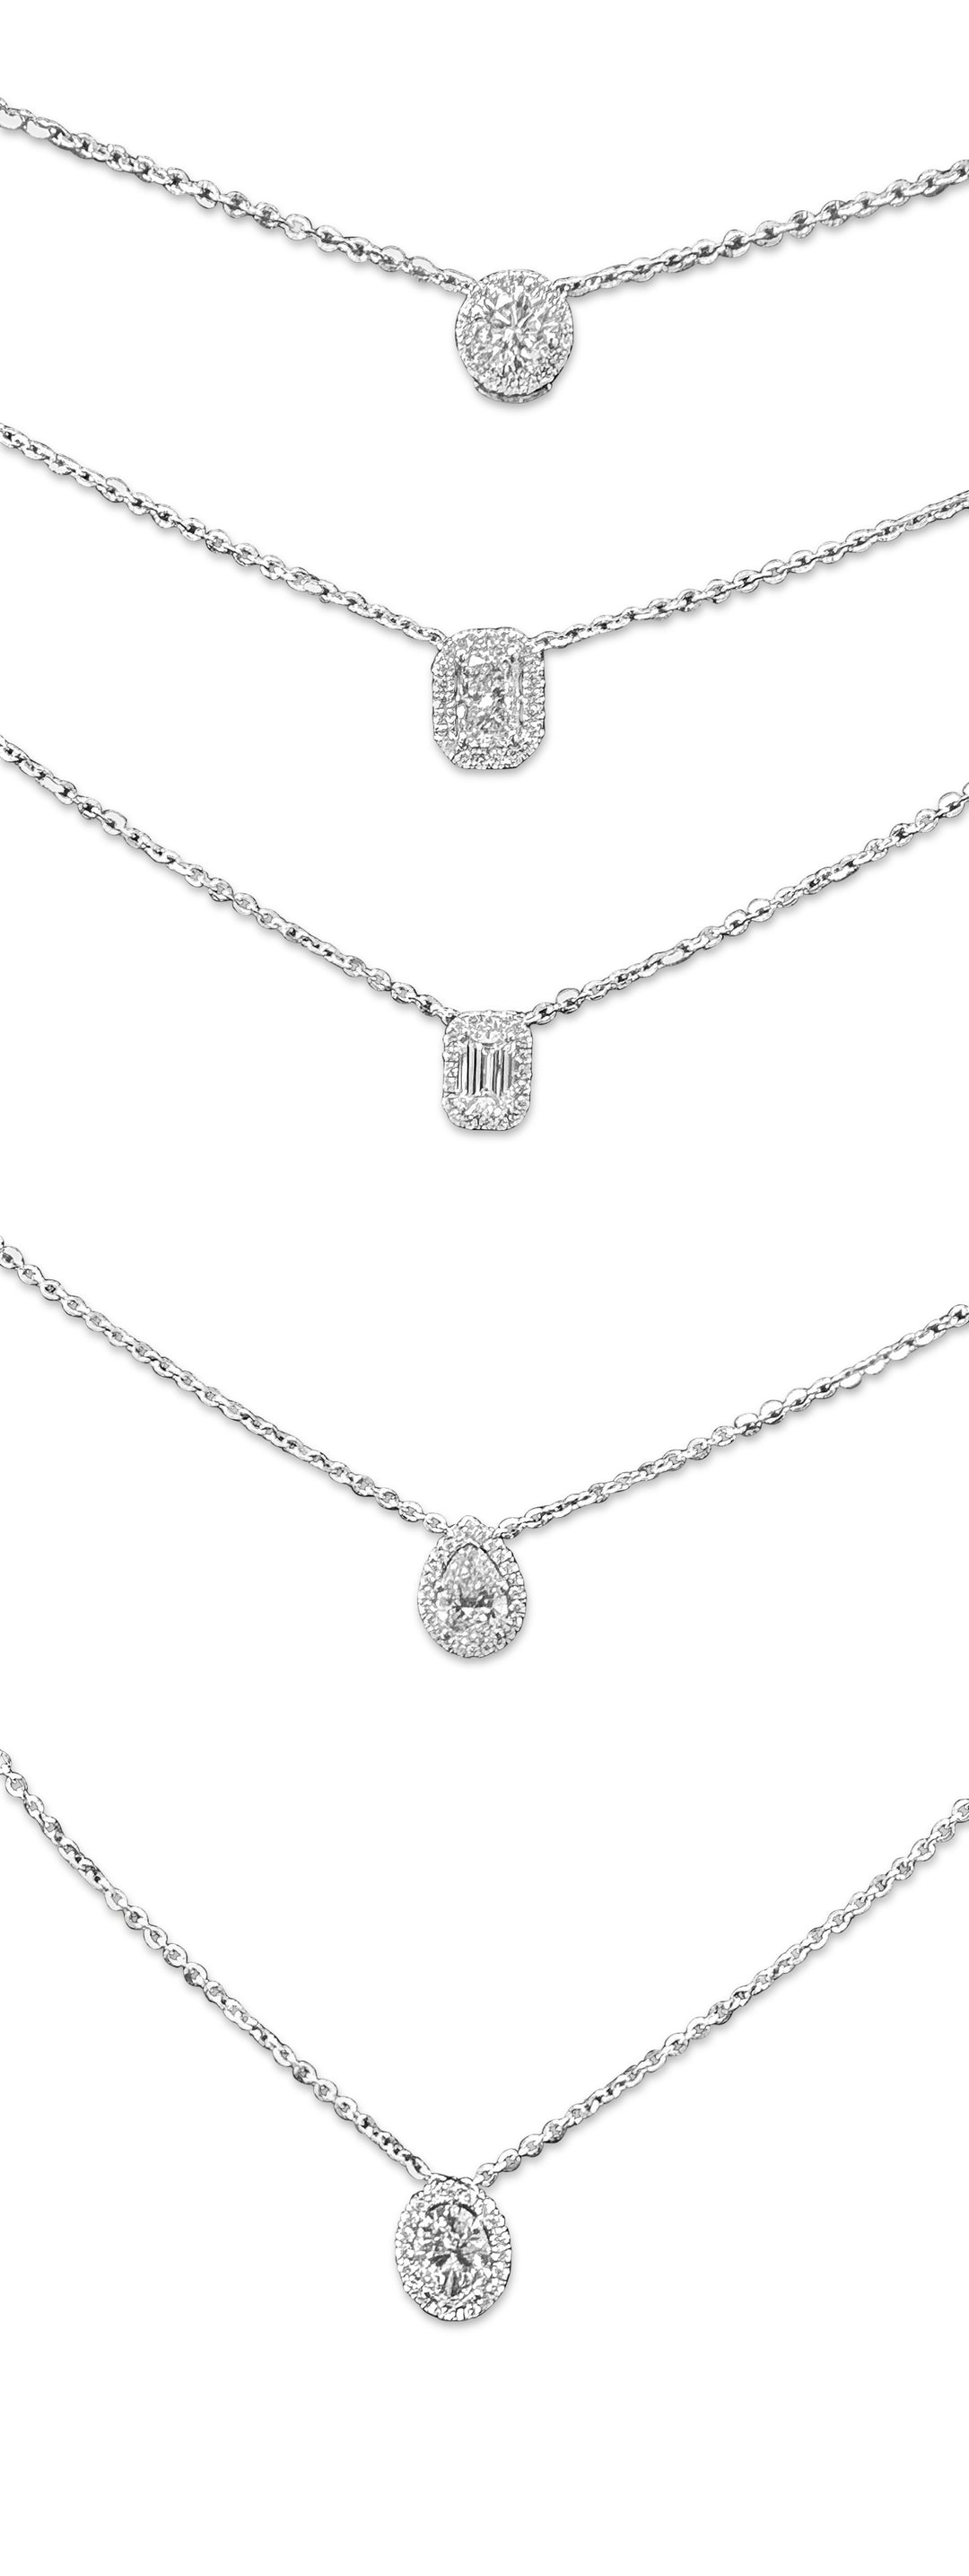 Various Lab-Grown Diamond Halo Pendant Necklaces Available